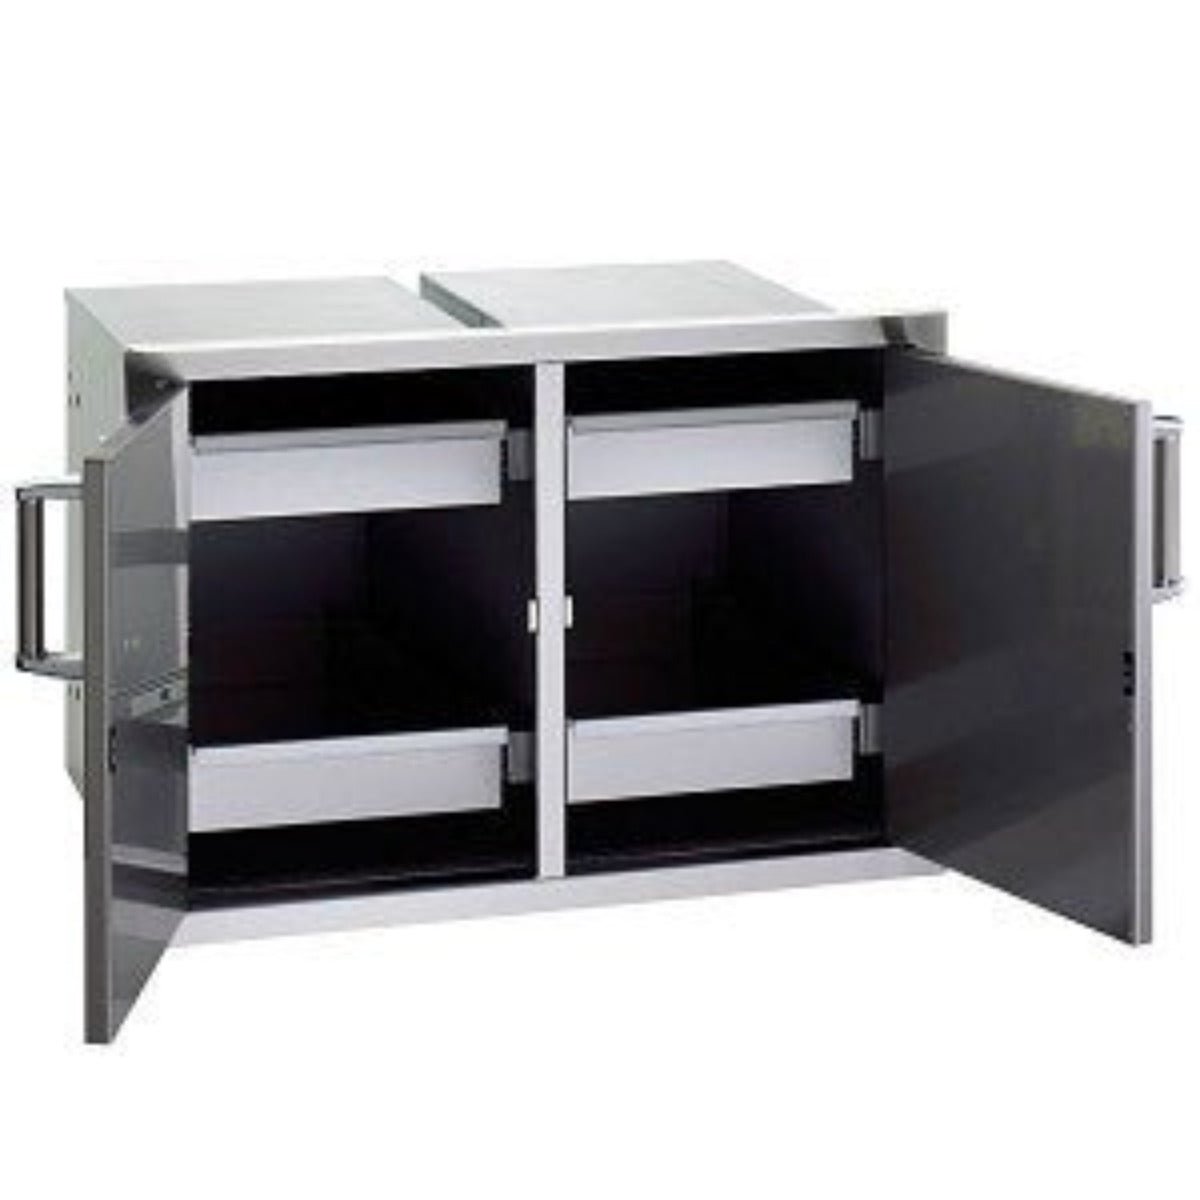 Fire Magic Grills Flush Double Doors with Dual Drawers - Outdoorium